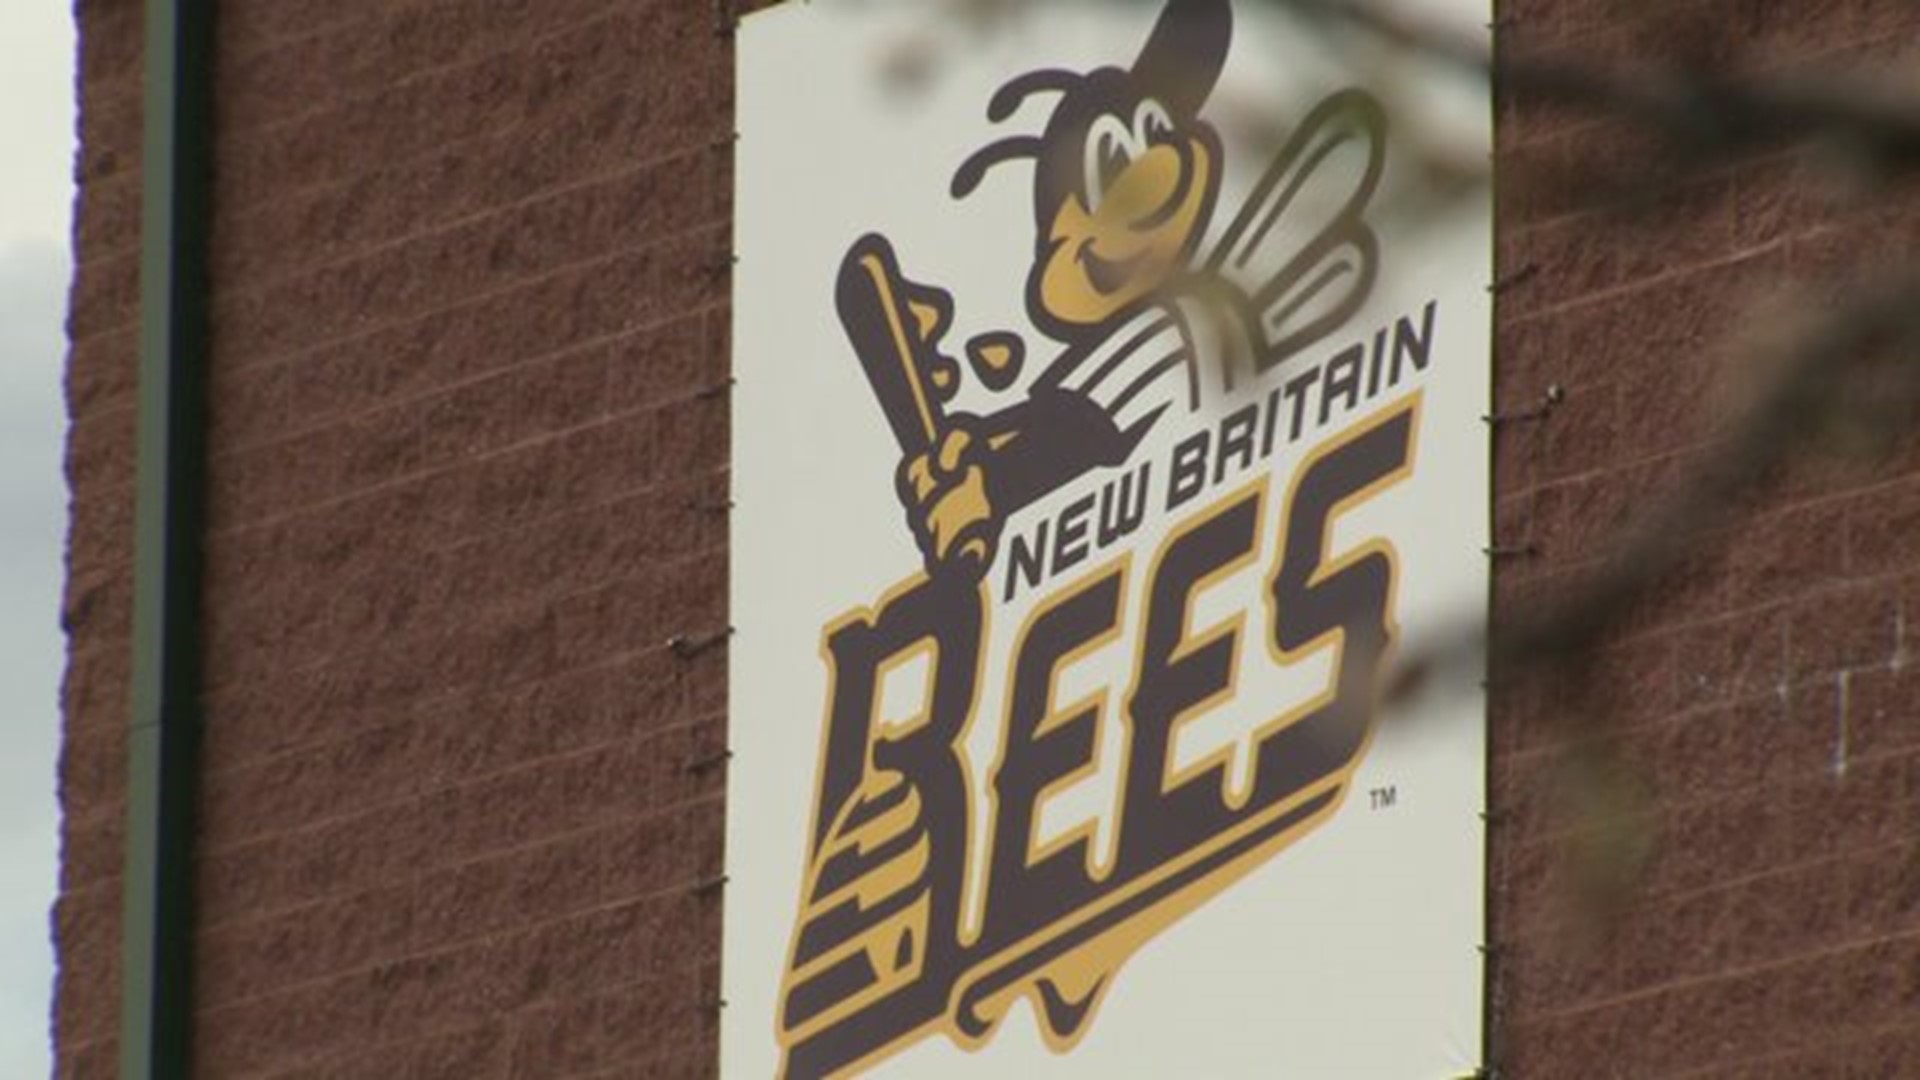 New Britain Bees gear up for first season